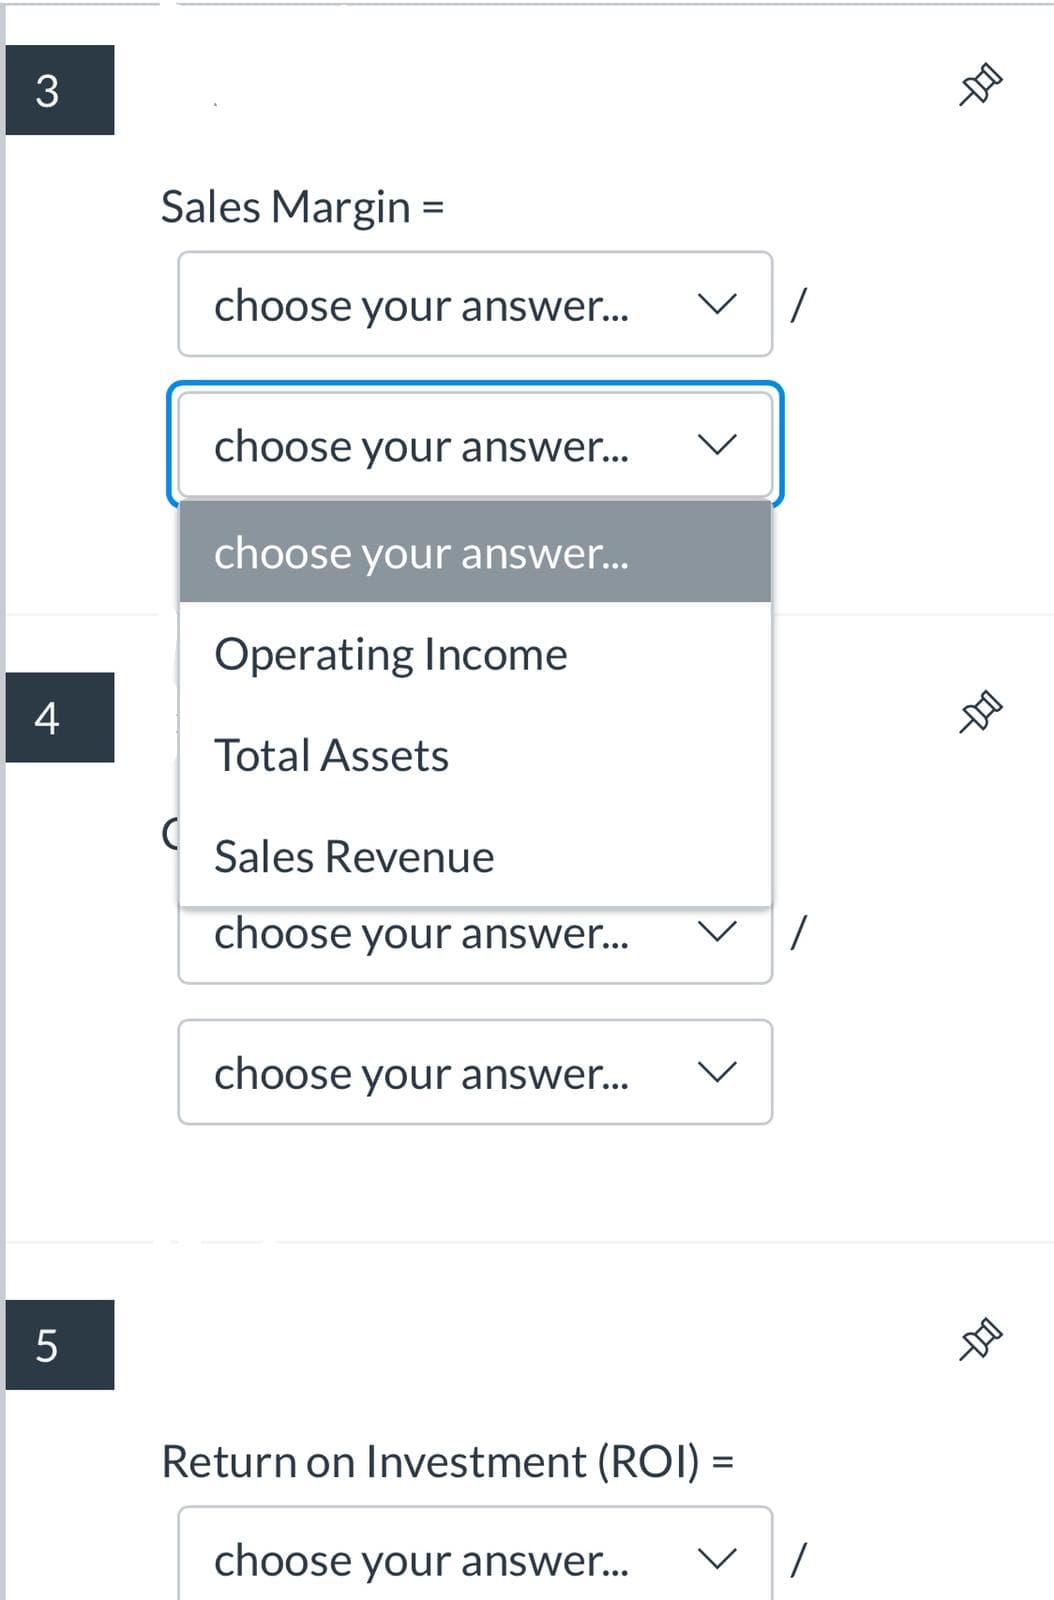 Sales Margin =
choose your answer...
choose your answer...
choose your answer...
Operating Income
4
Total Assets
Sales Revenue
choose your answer...
choose your answer...
レ
Return on Investment (ROI) =
choose your answer...
